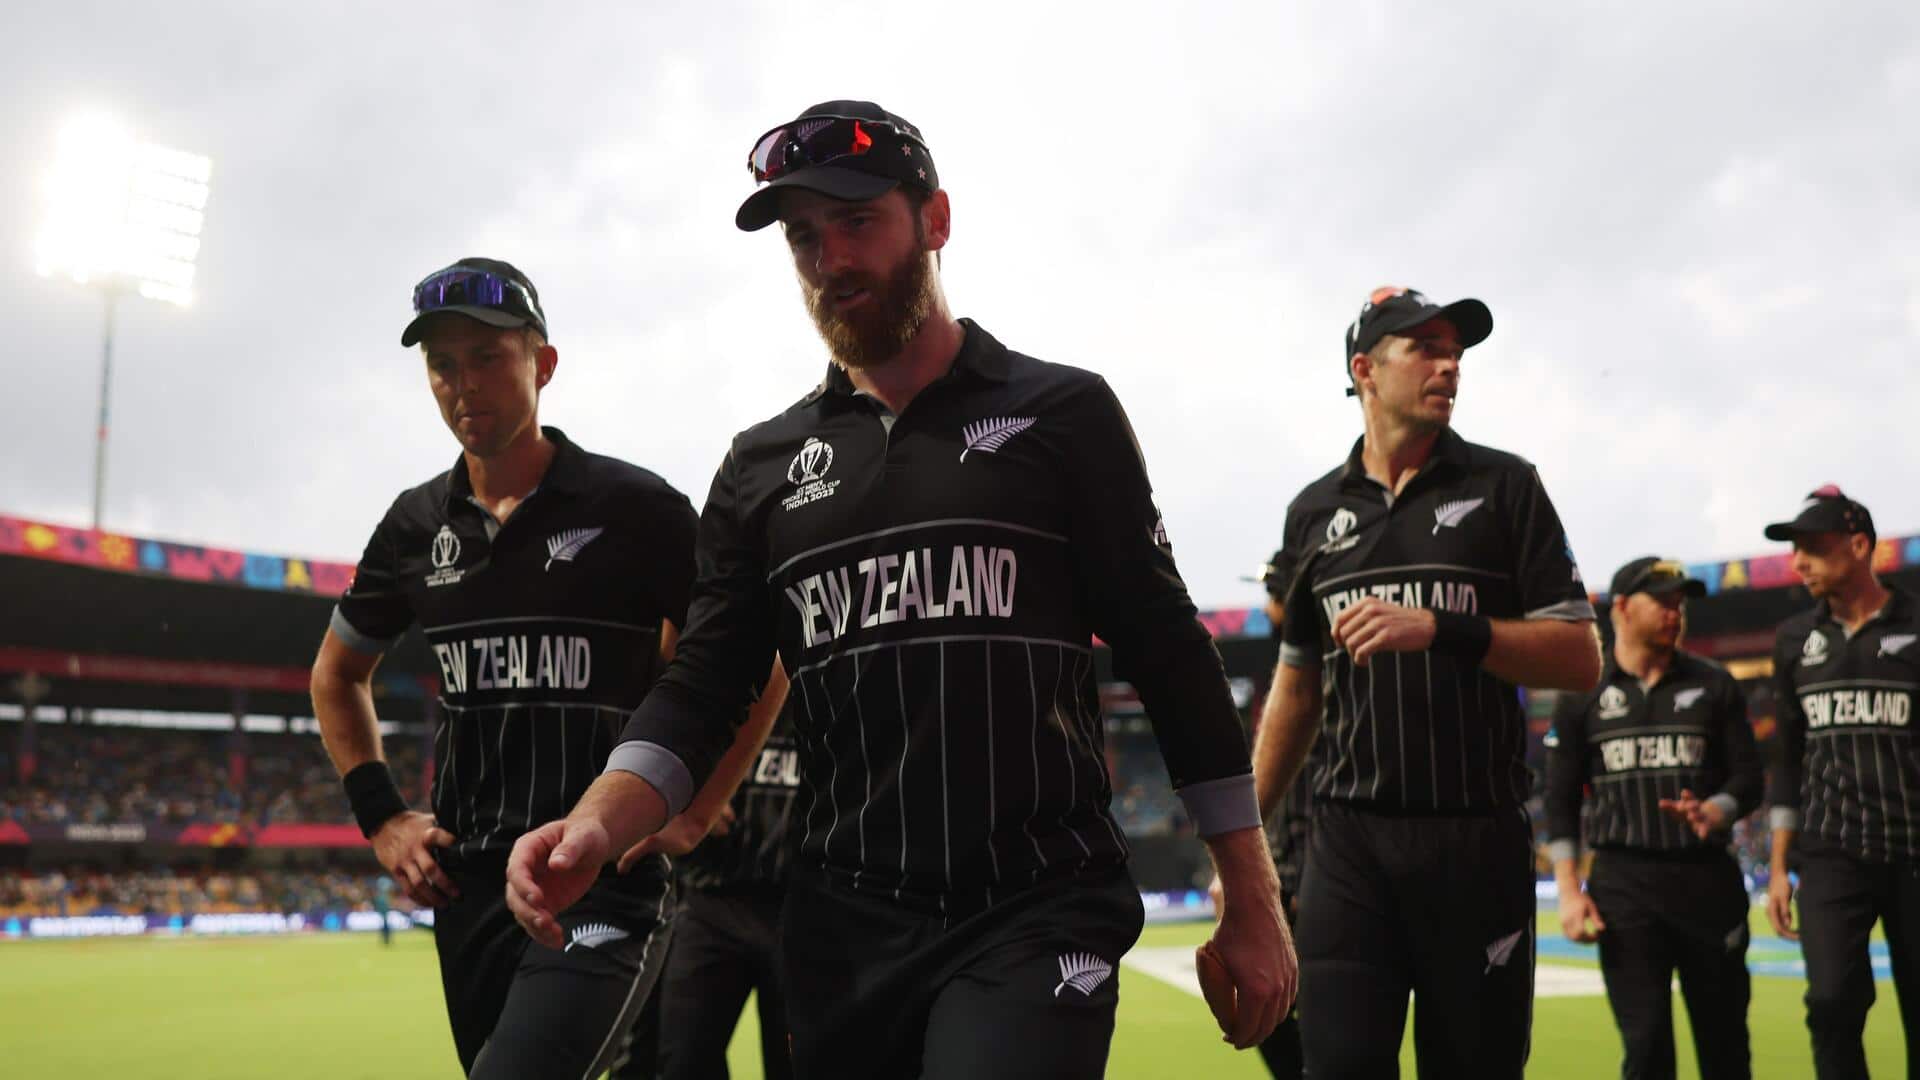 ICC World Cup, New Zealand vs Sri Lanka: Statistical preview